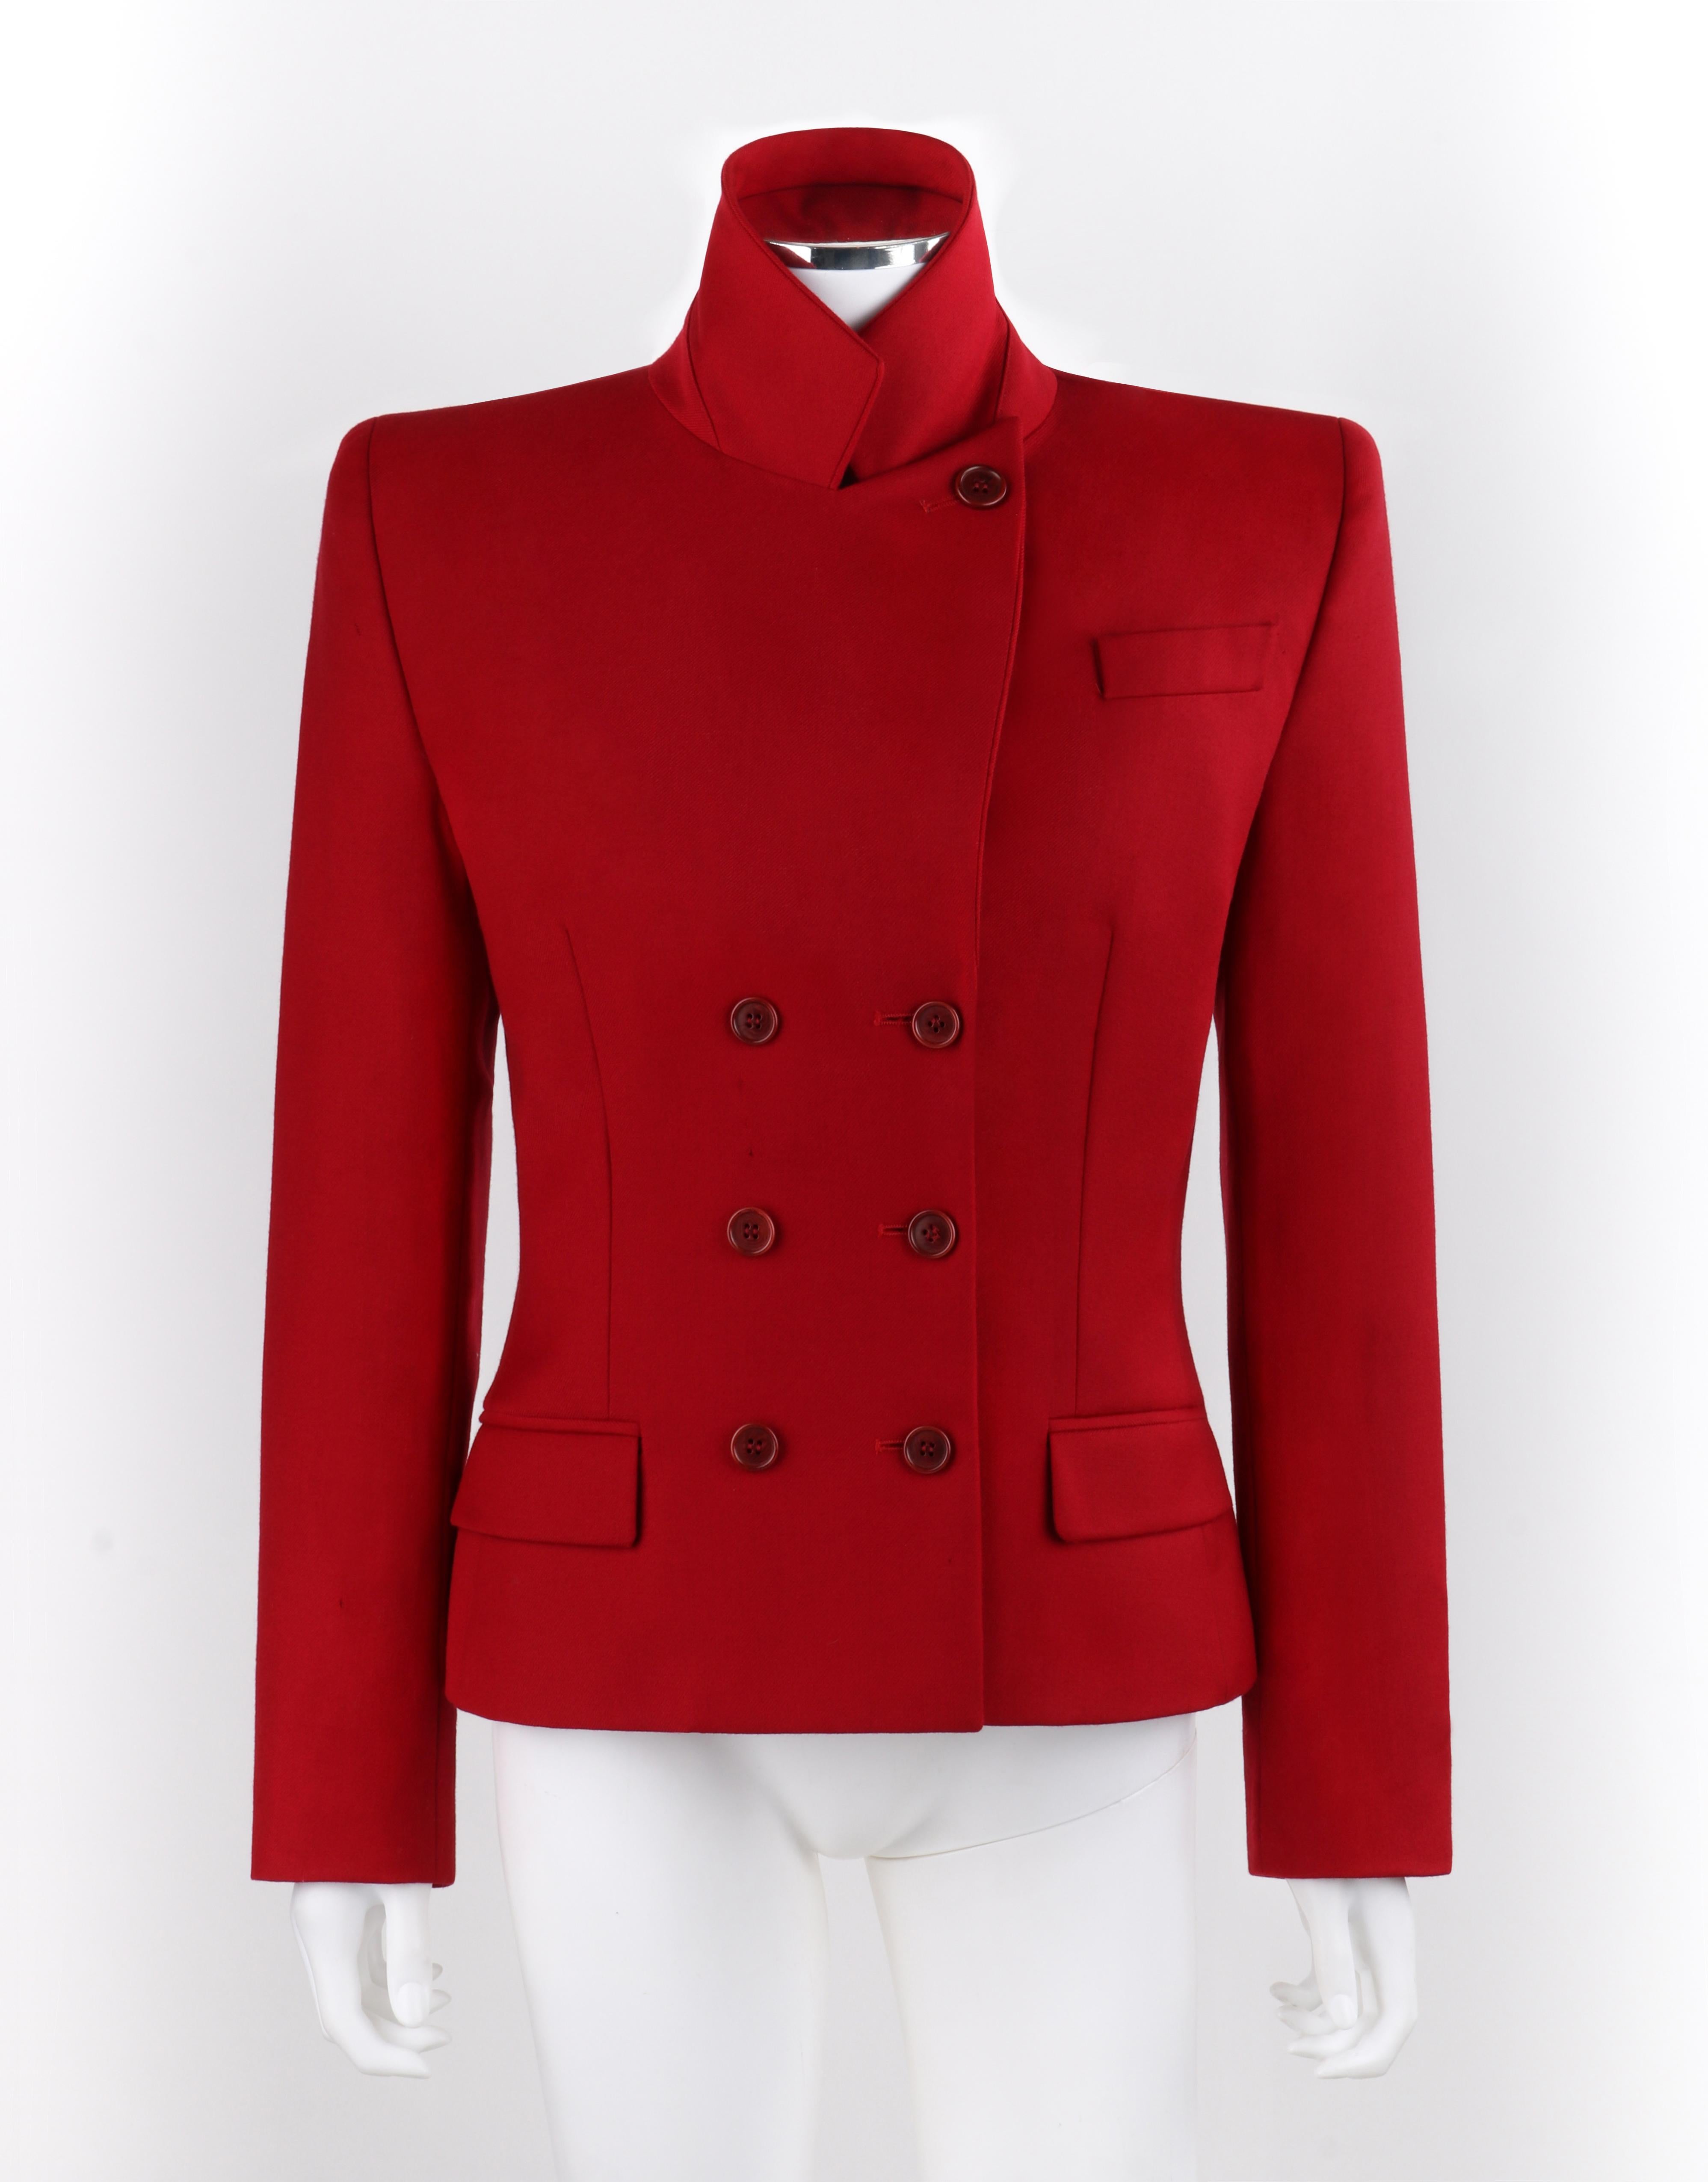 ALEXANDER McQUEEN A/W 1998 “Joan” Red Double Breasted Button Up Blazer Jacket
 
Brand / Manufacturer: Alexander McQueen
Collection: A/W 1998 “Joan” 
Designer: Alexander McQueen
Style: Blazer Jacket
Color(s): Red
Lined: Yes
Marked Fabric Content: